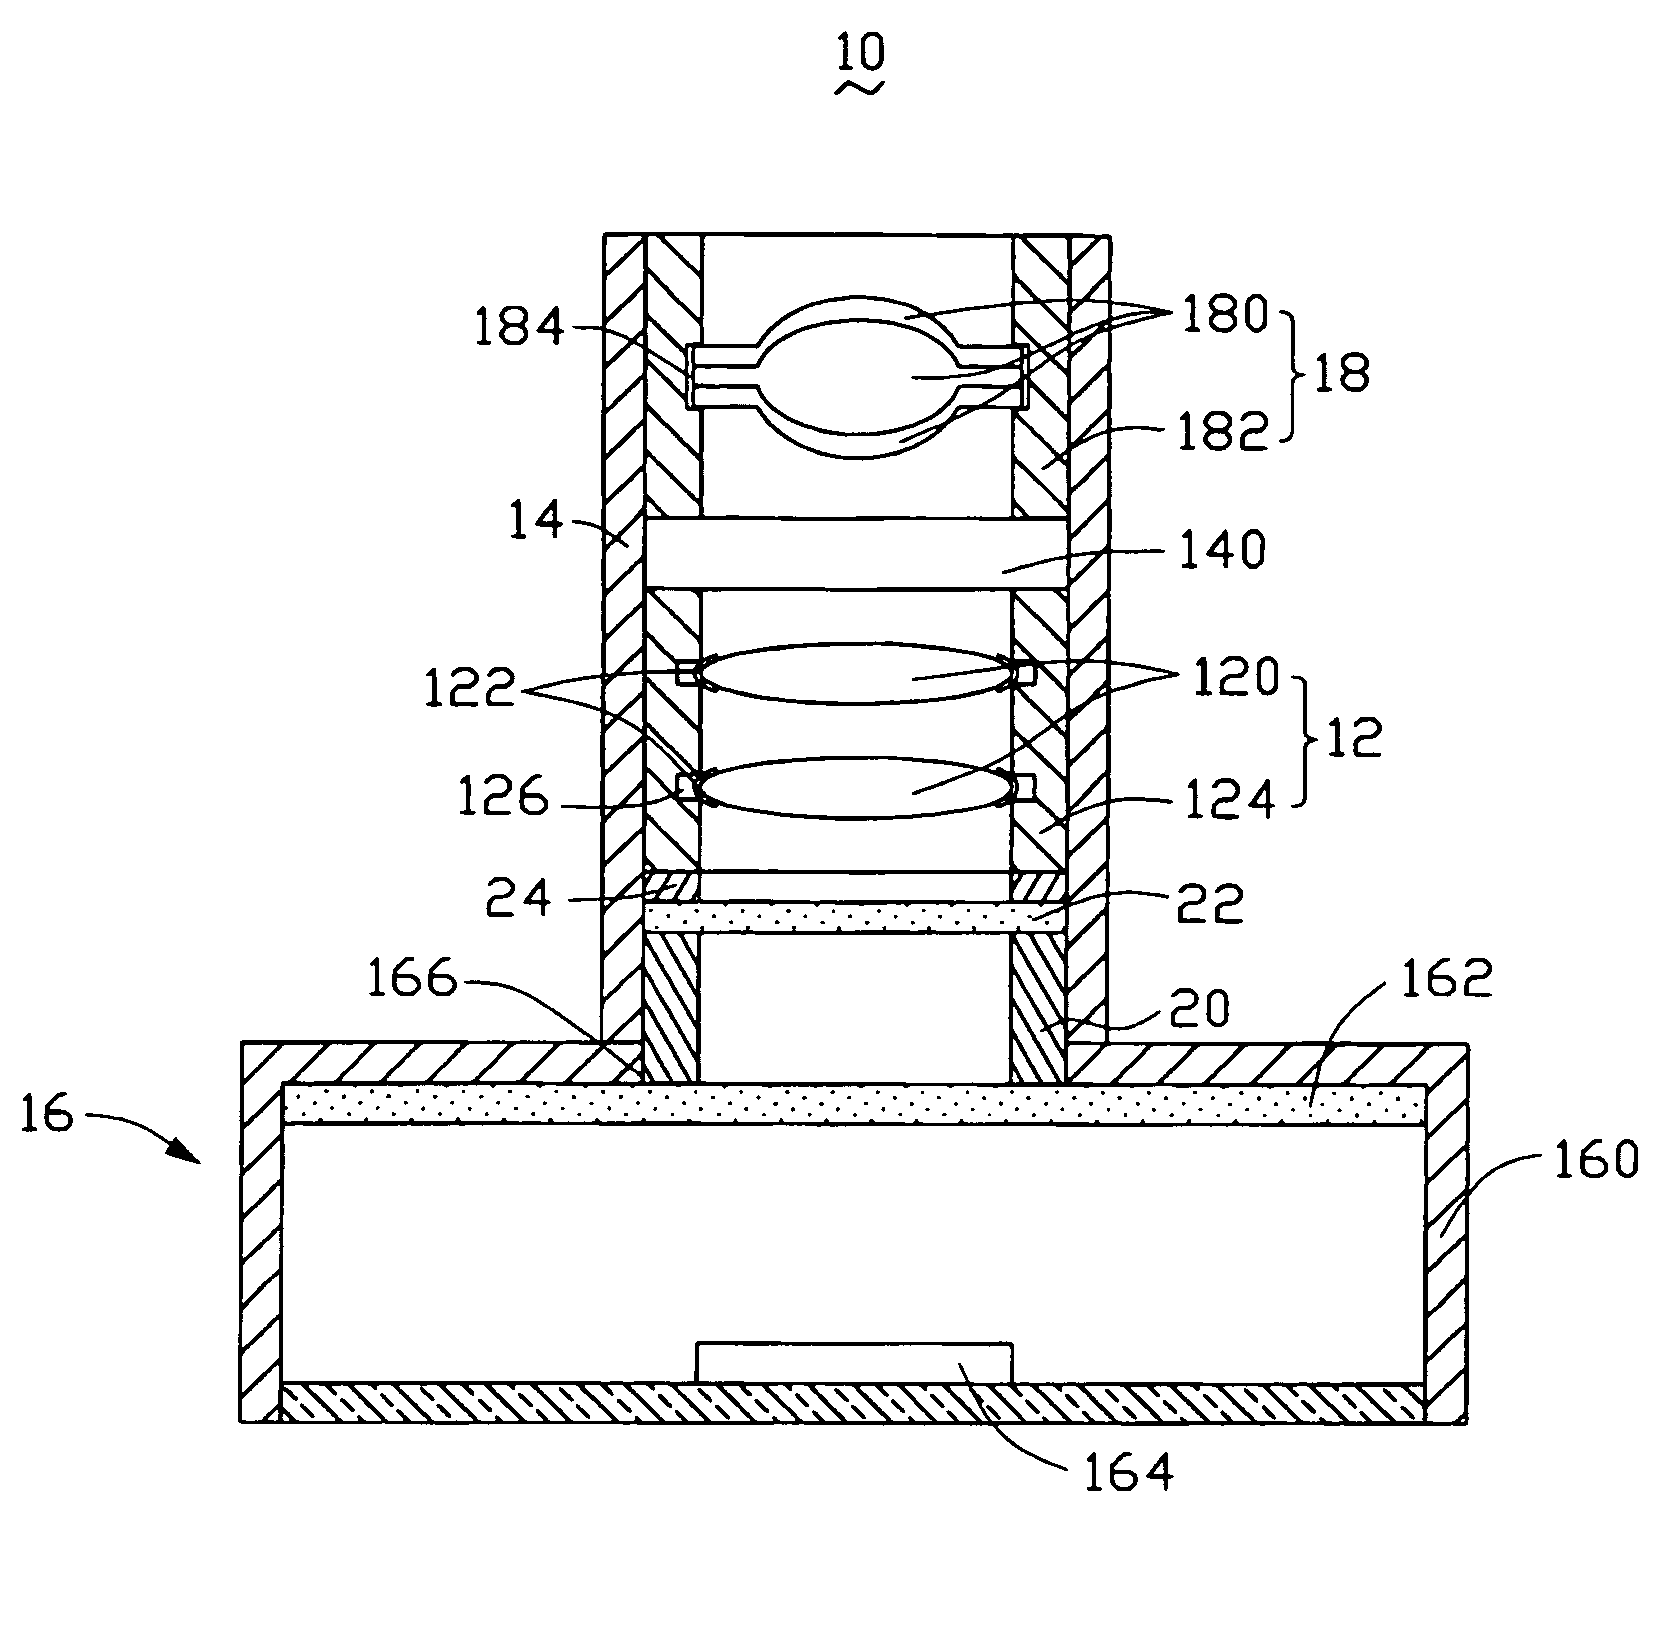 Optical system having lenses with adjustable focal length